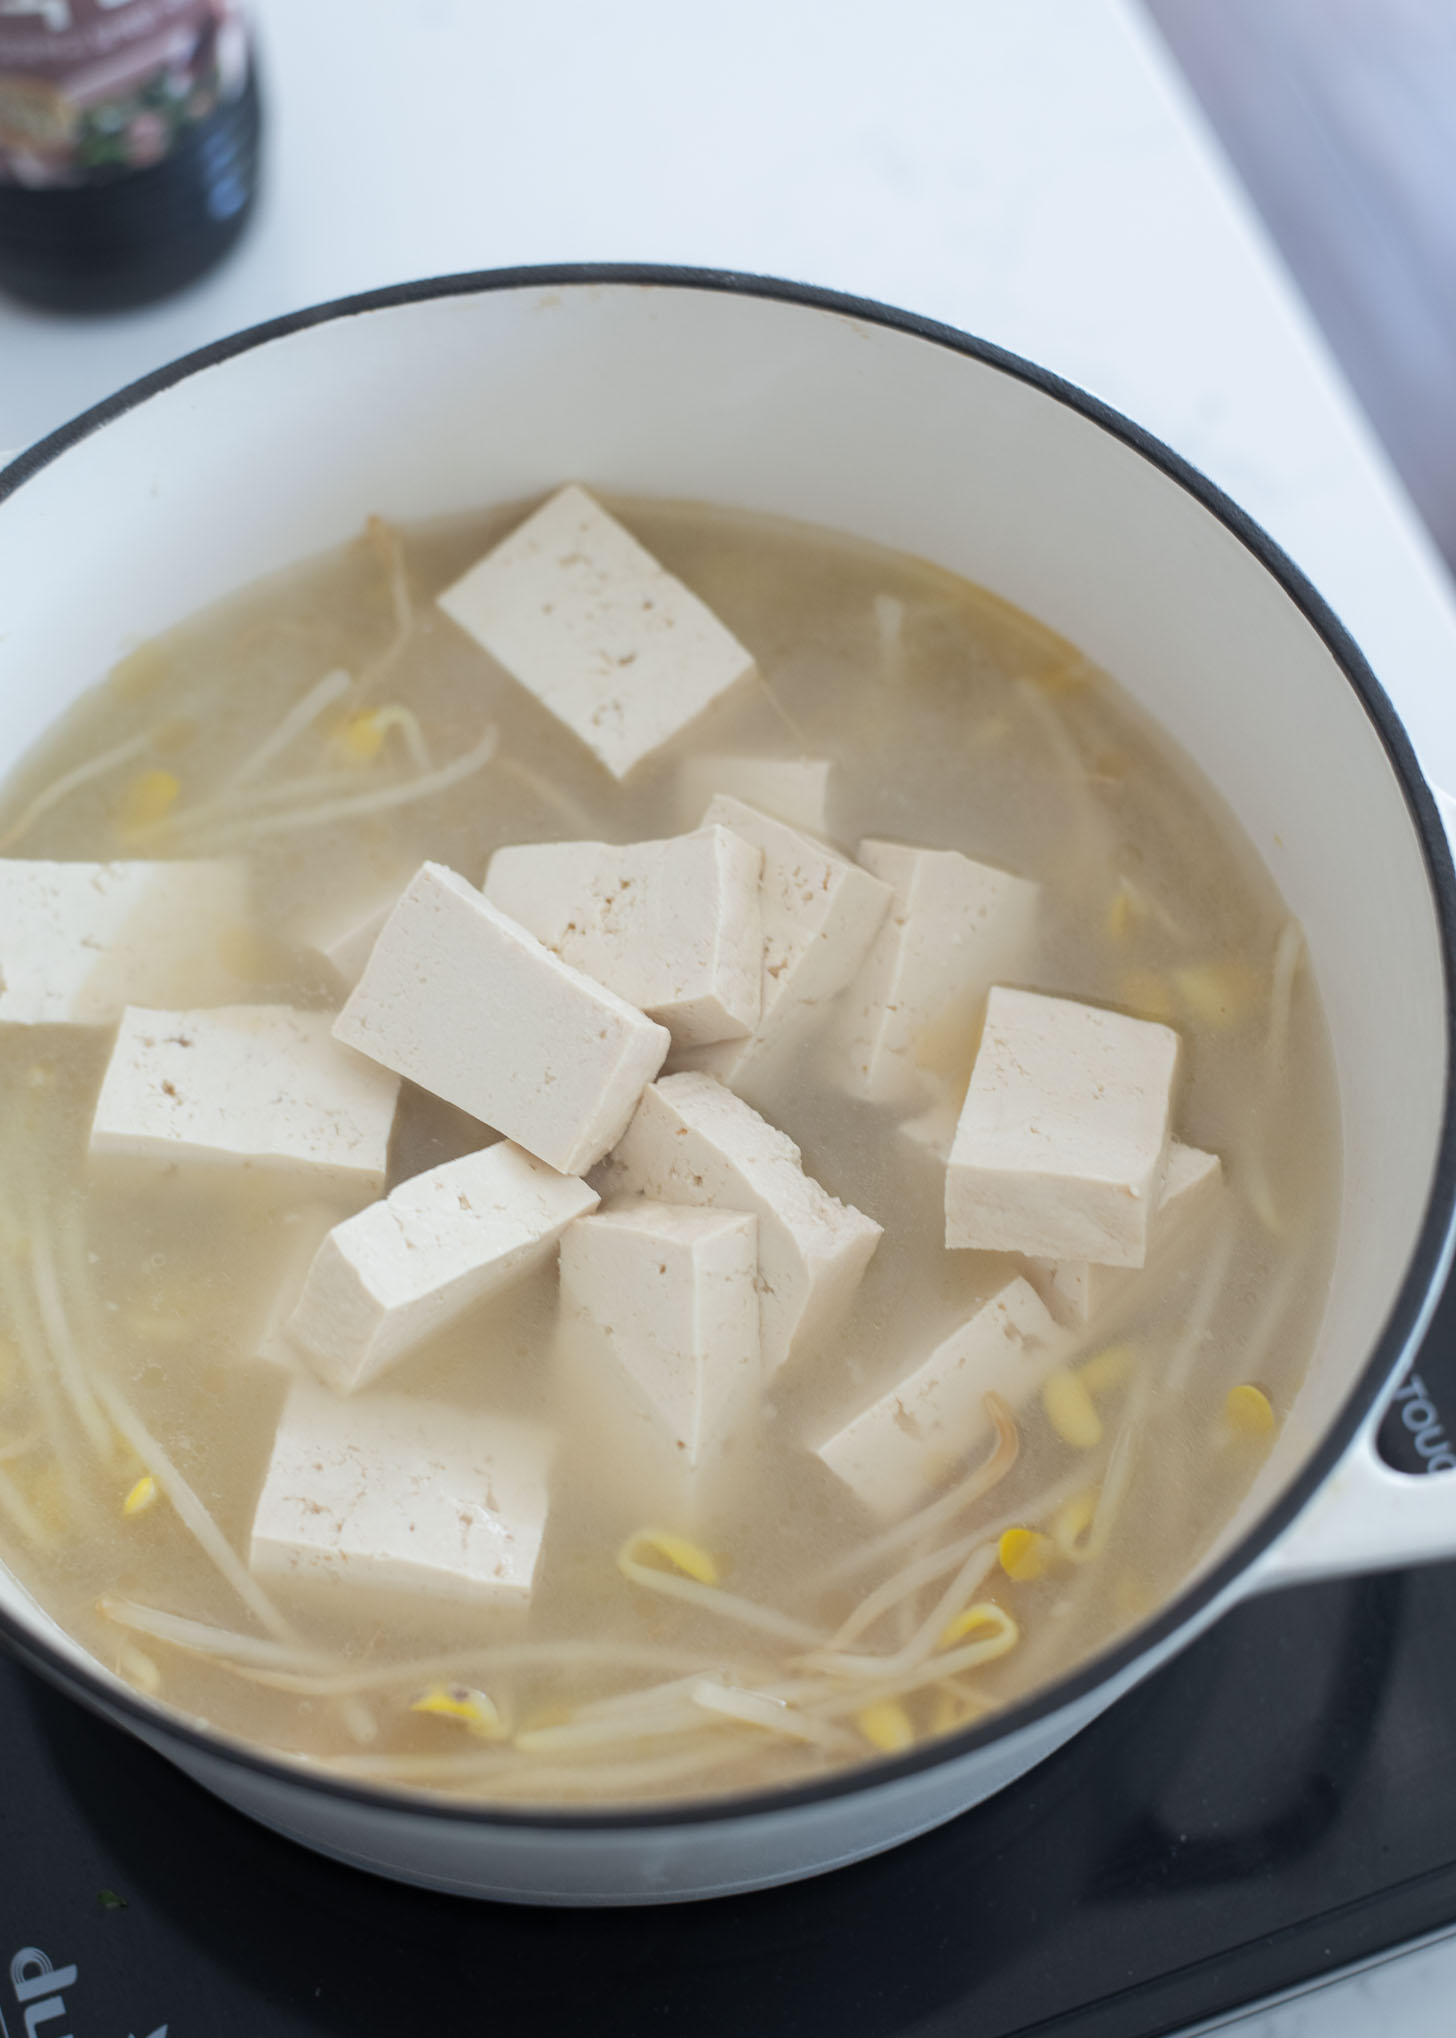 Soybean sprouts and tofu slices are added to pollock soup in a pot.